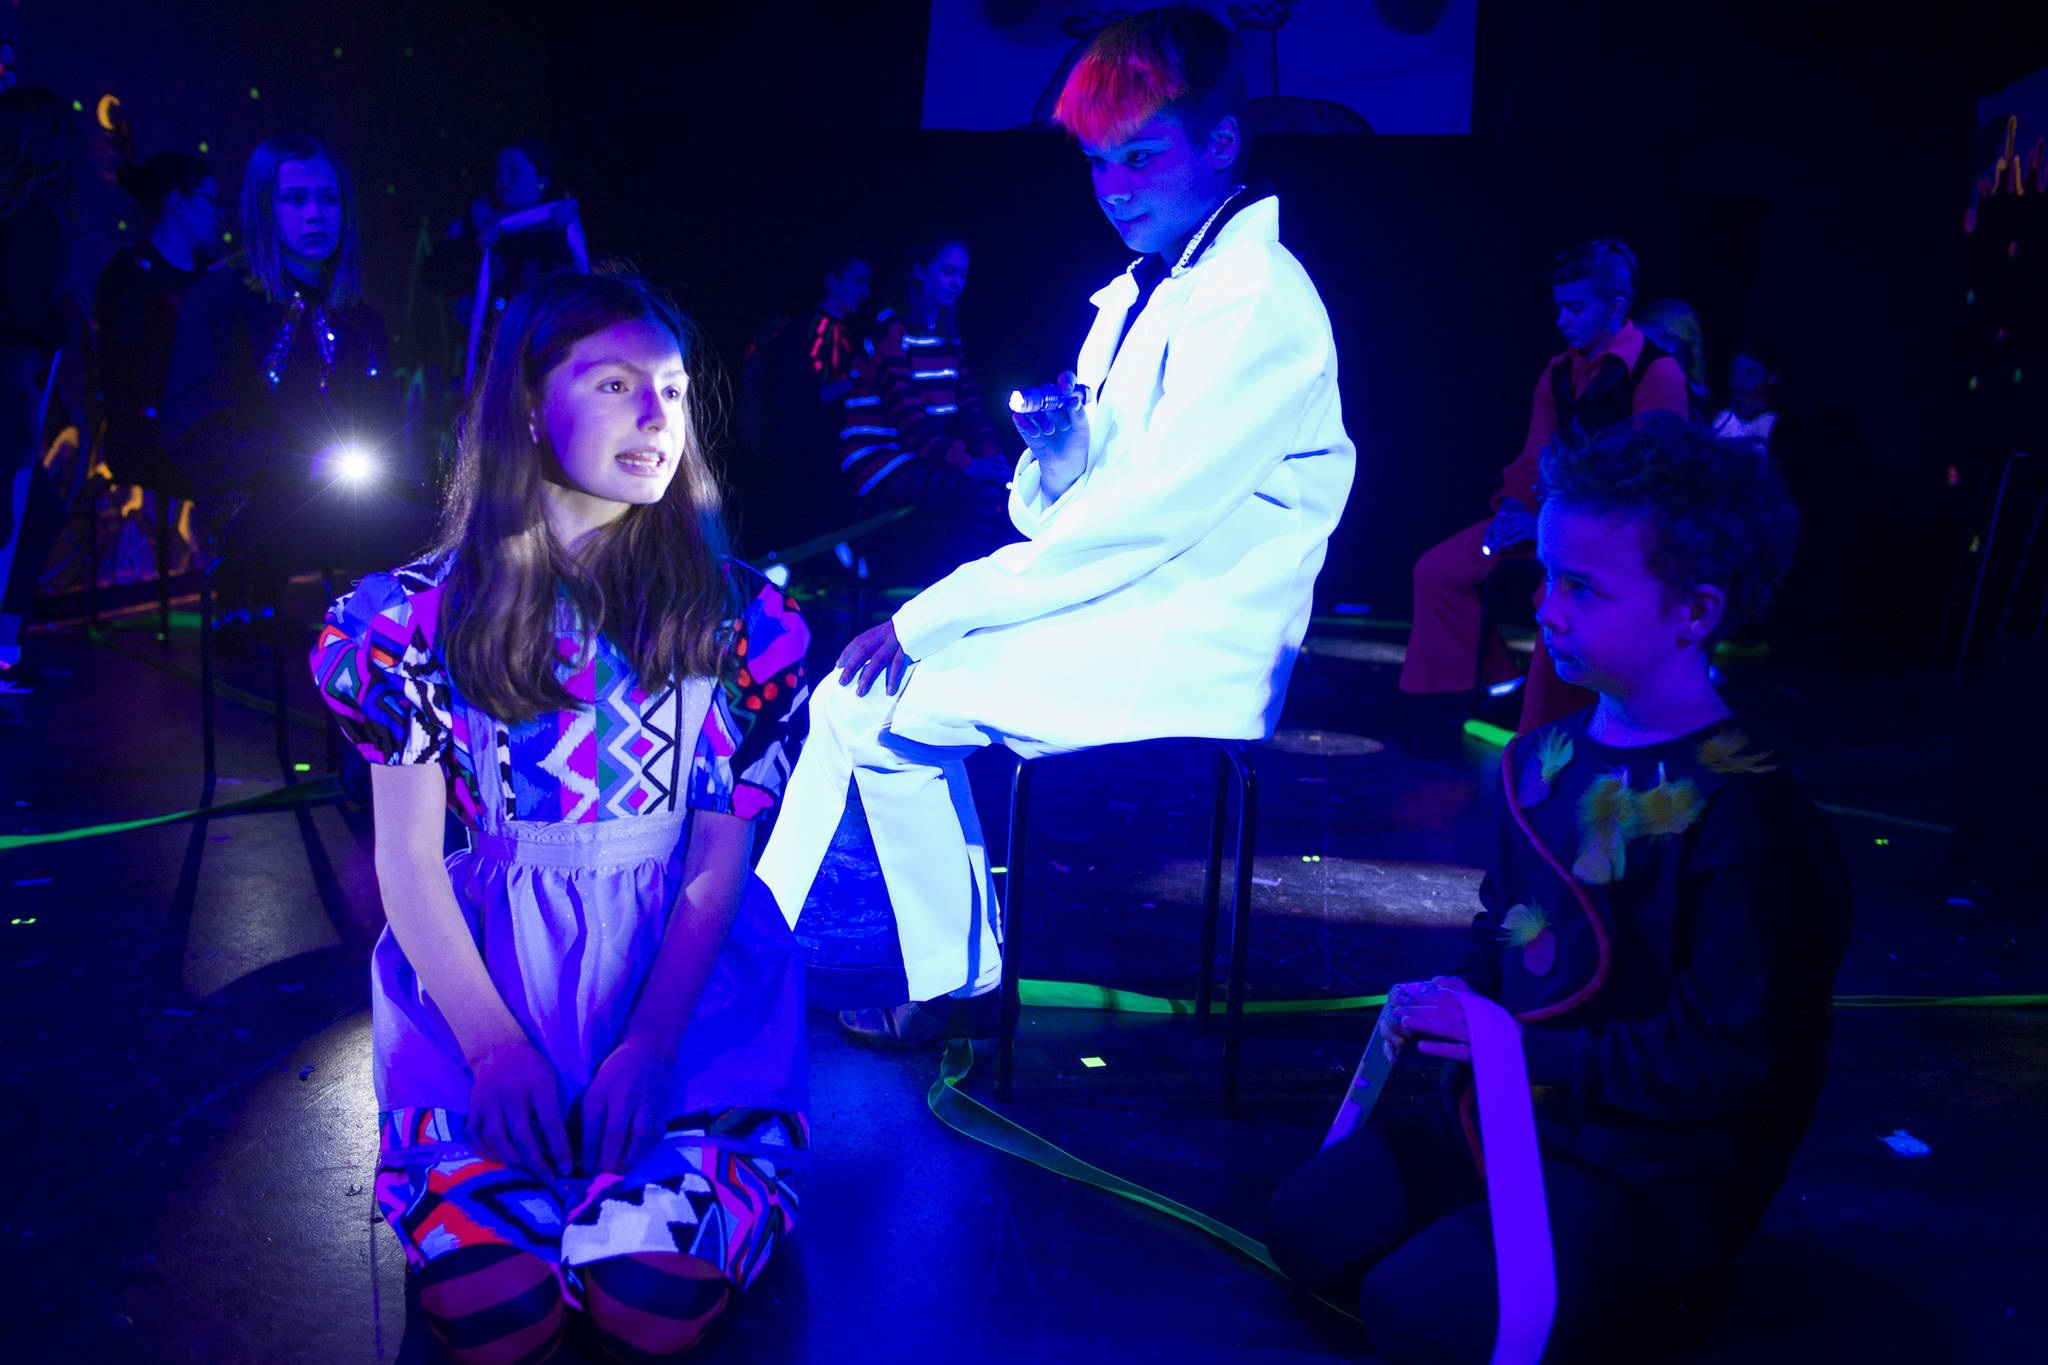 Alice (Sophia Nylen) explores the disorienting Hall of Doors and its resident Wonders (Kyra Wood and Alex Boily, right) in a black-light scene from “DISCO ALICE: The Wonderland Remix” during rehearsal by Perseverance Theatre’s Young Company on Monday, Feb. 25, 2019. (Michael Penn | Juneau Empire)